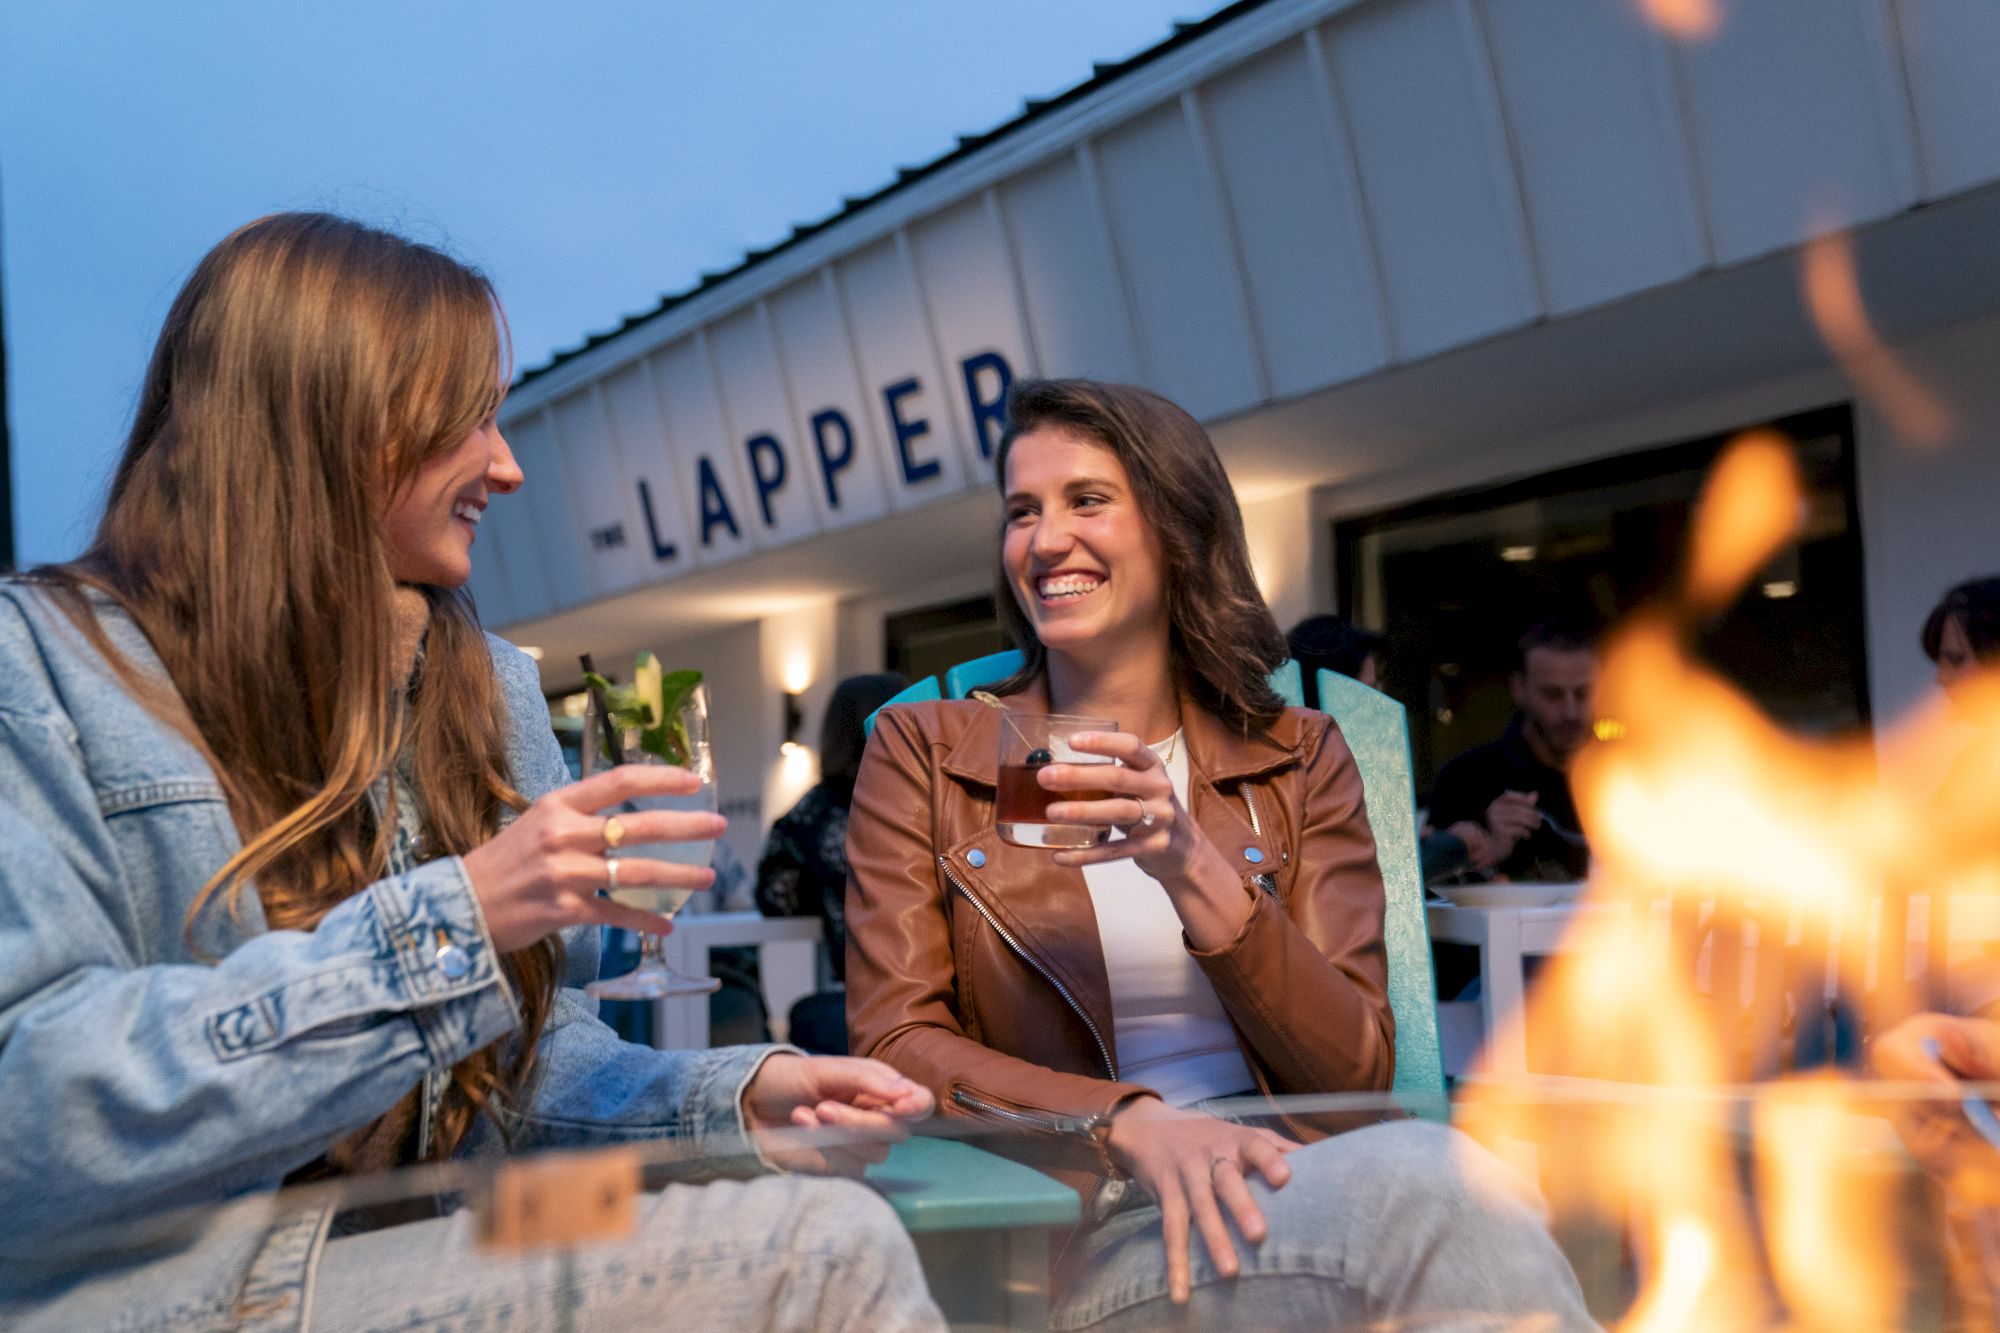 Two women are enjoying drinks and laughing by a fire pit at an outdoor venue with a sign that reads 